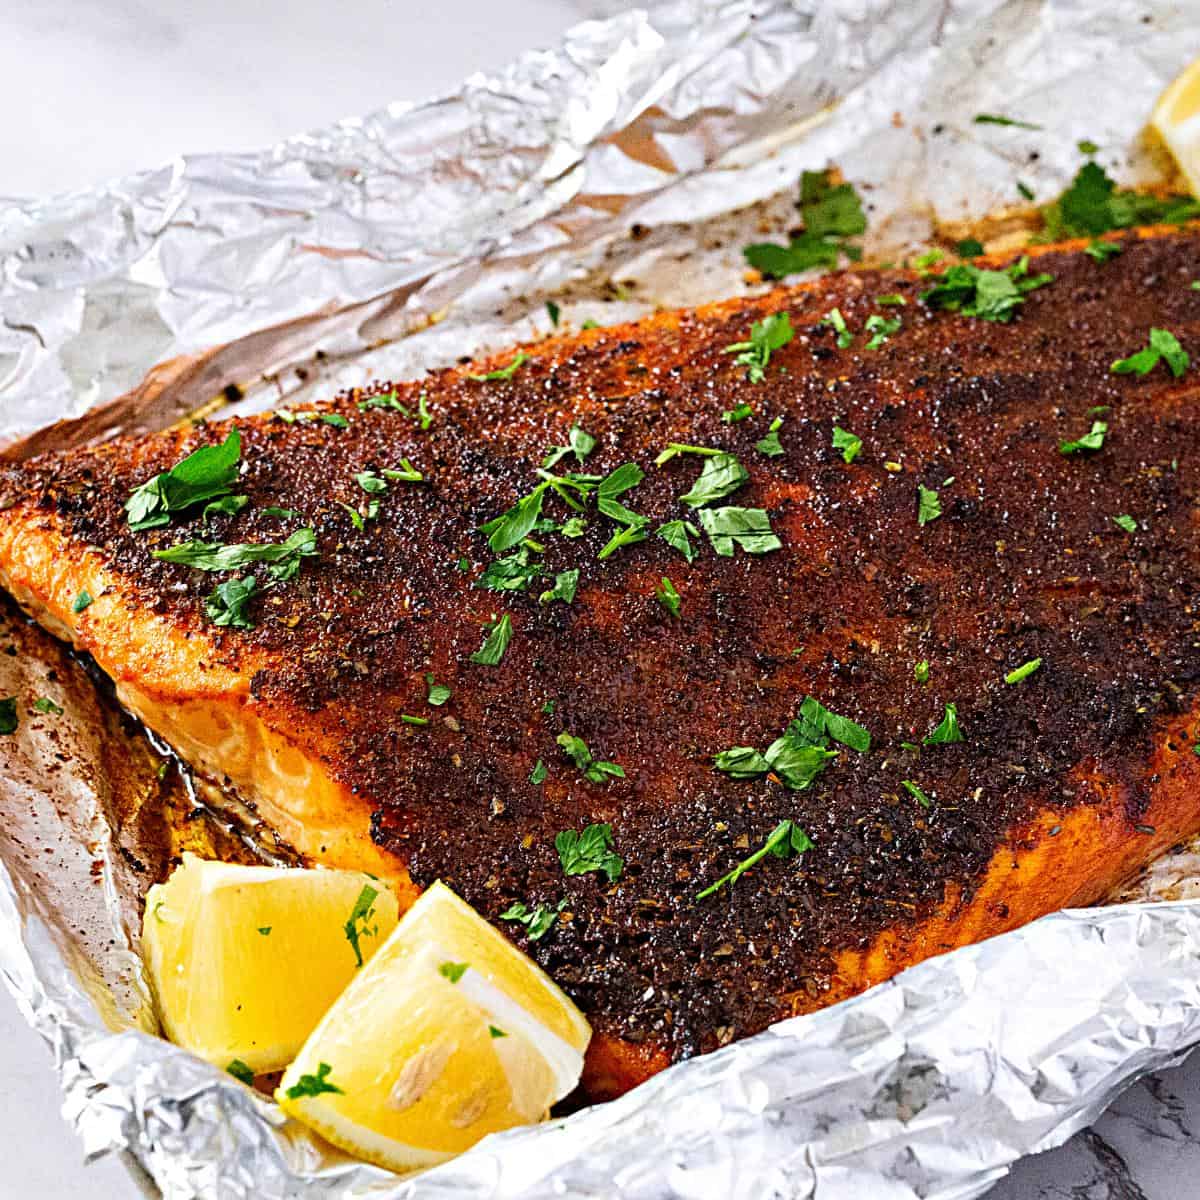 A fillet with blackened on the salmon.